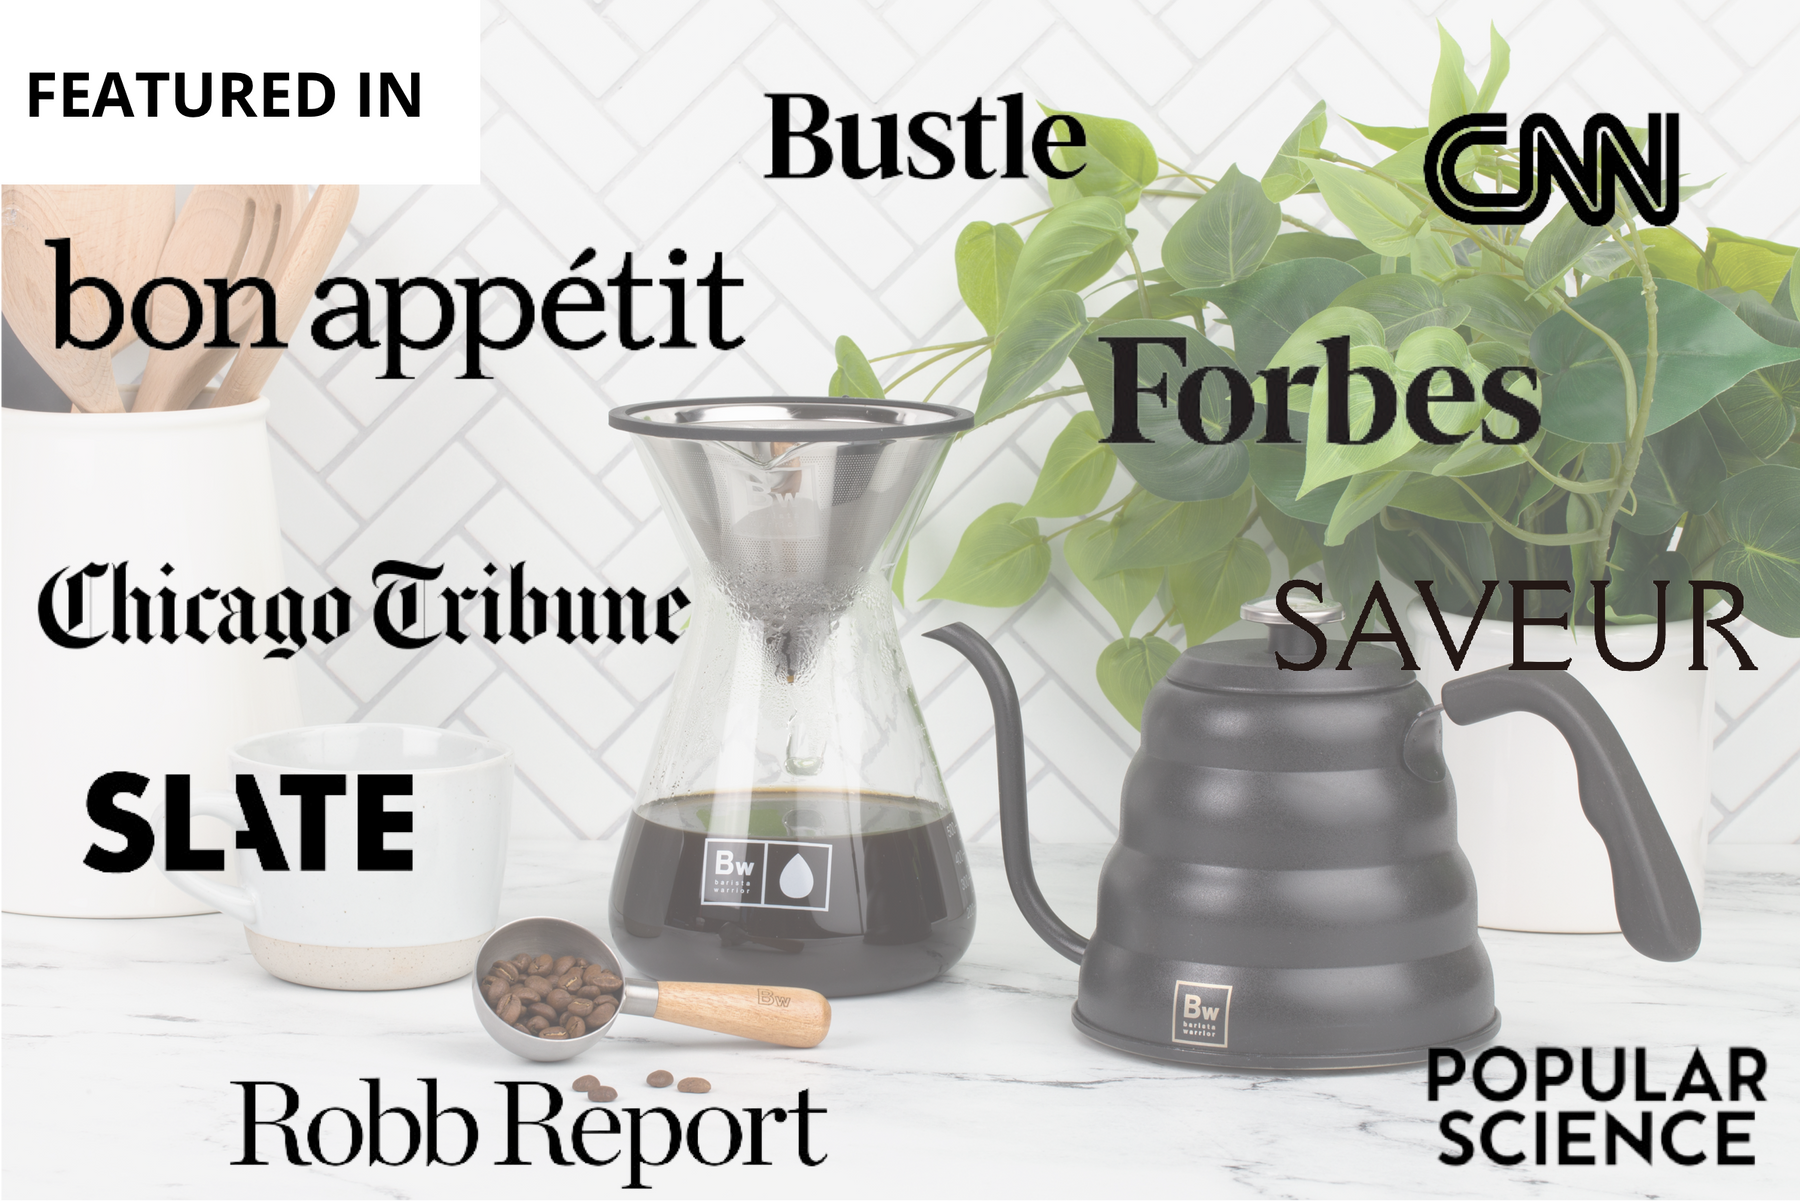 Barista Warrior Pour Over Coffee Maker Set - Pour Over Kit Includes Large Glass Carafe and Reusable Dripper Coffee Filter and Coffee Scoop - 7 Cup